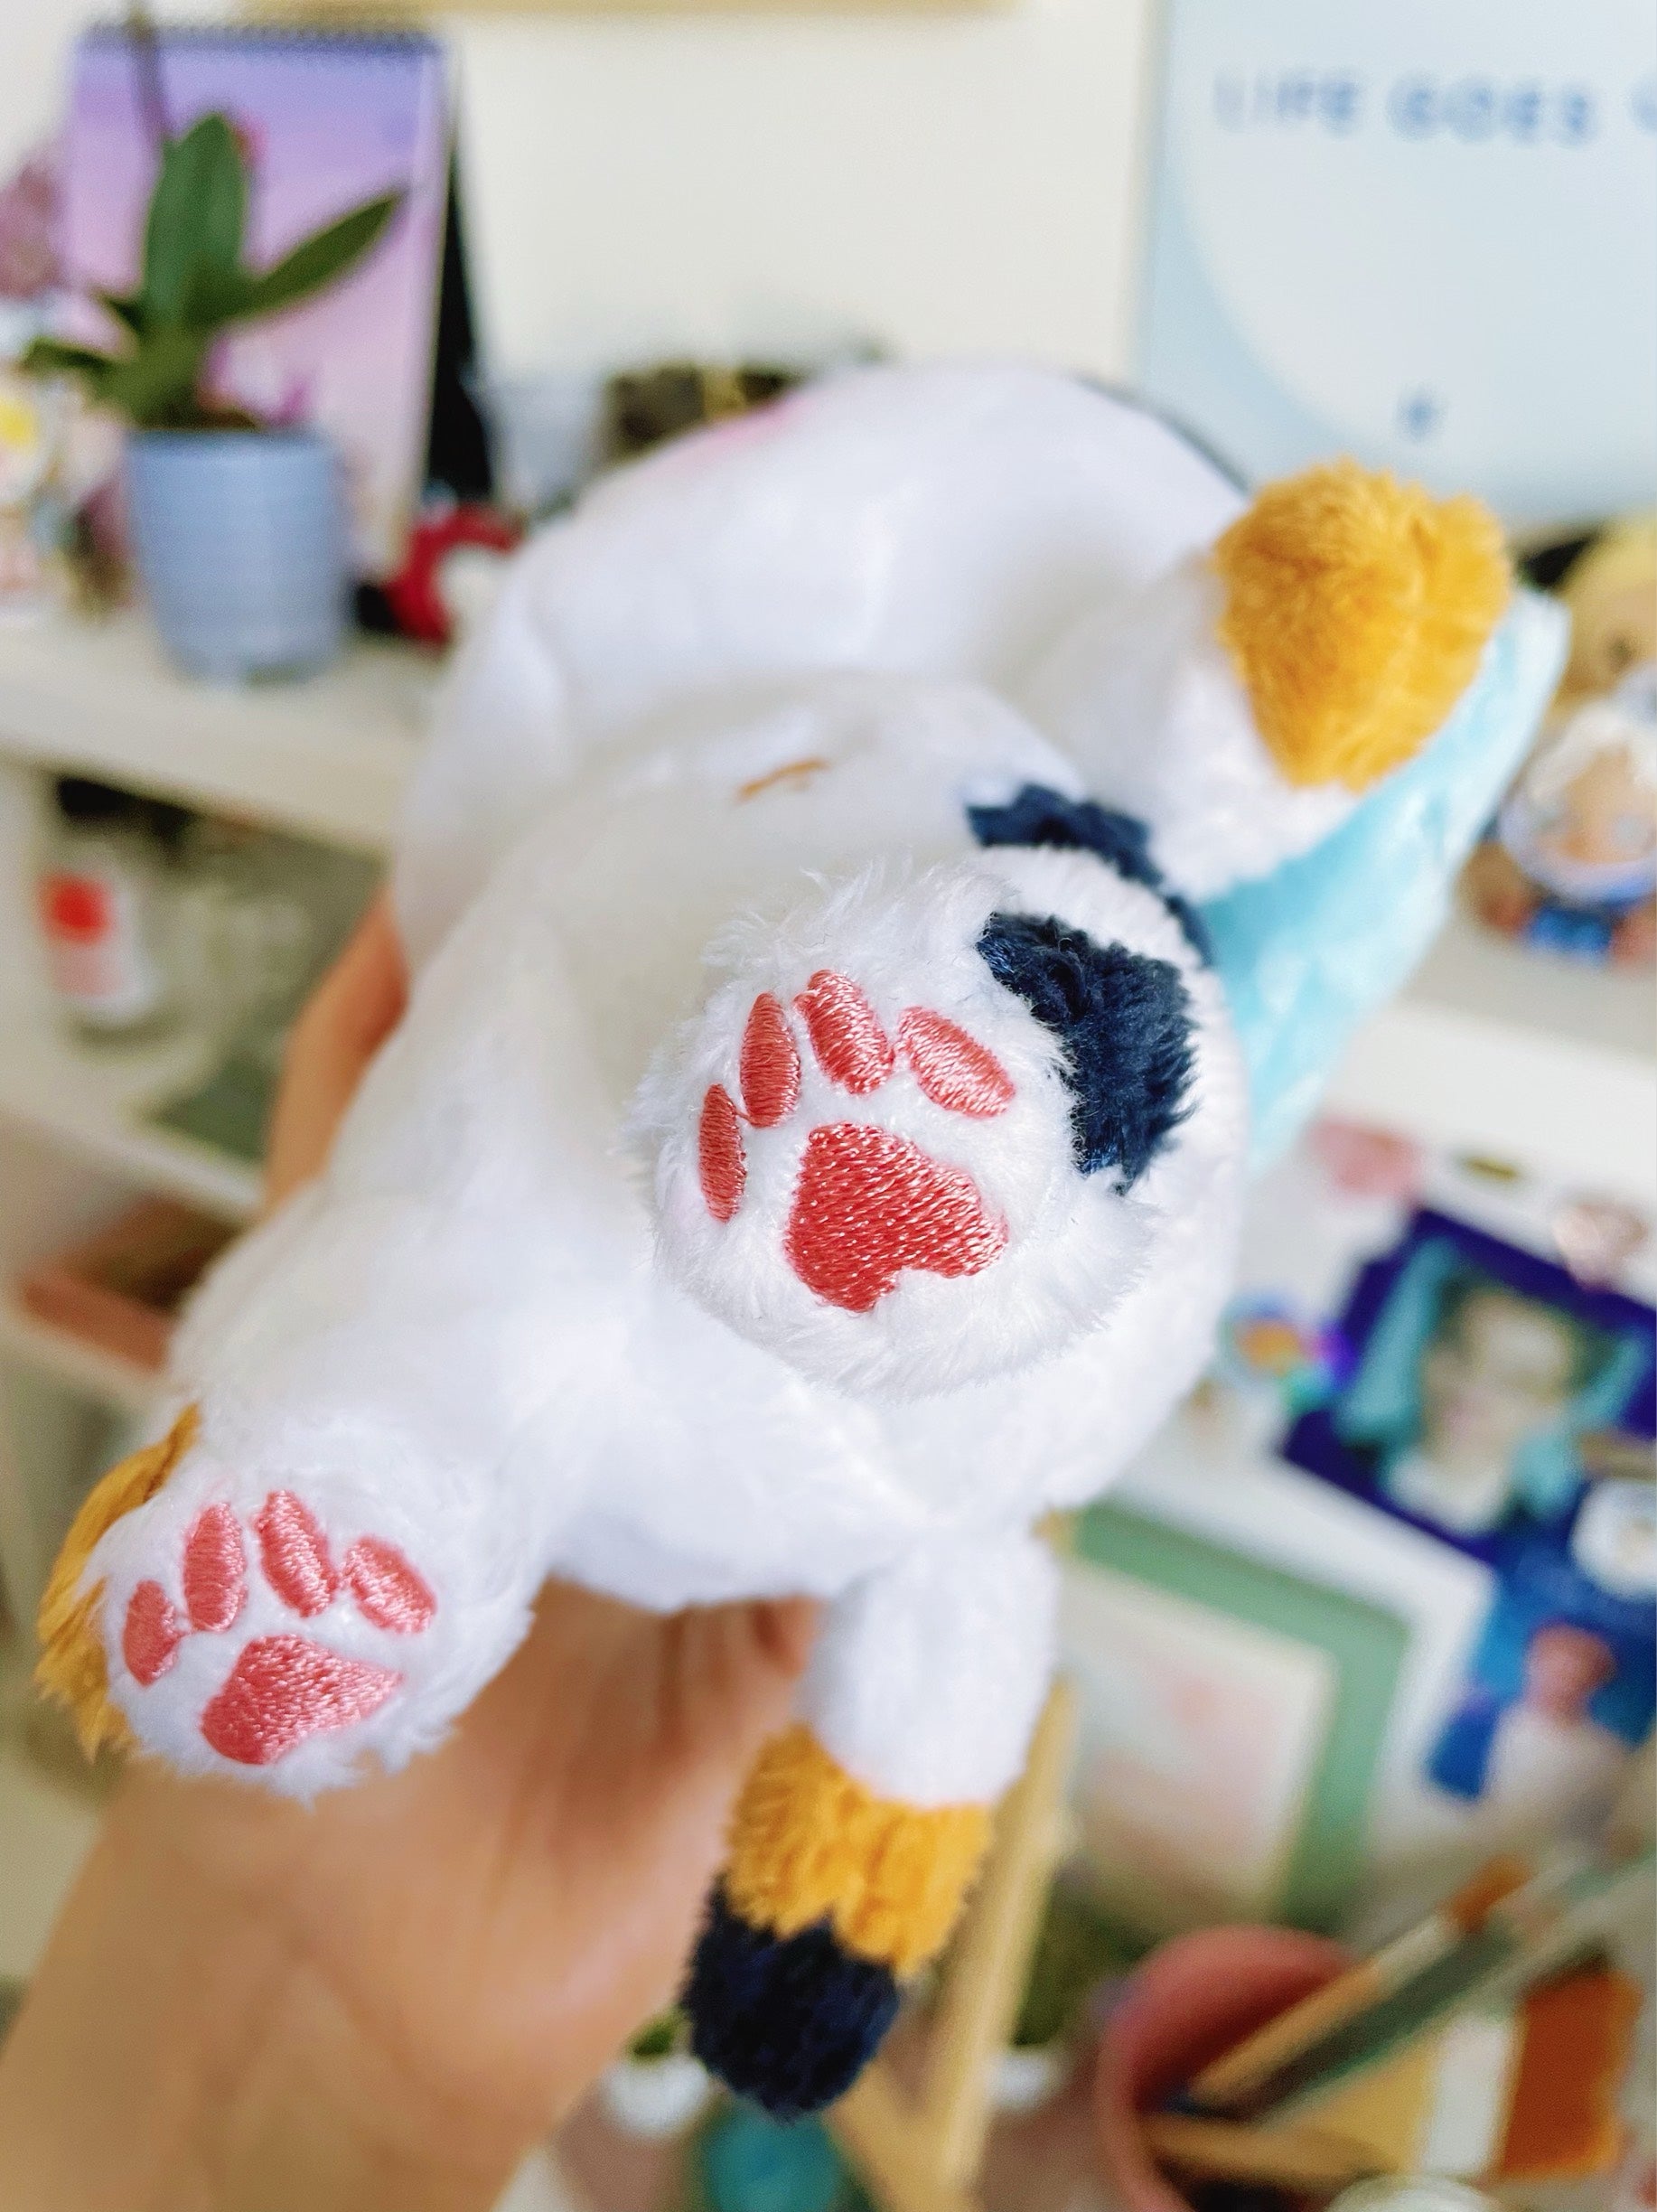 Adorable Calico Cat Plush Stuffed Toy with Angel Wings